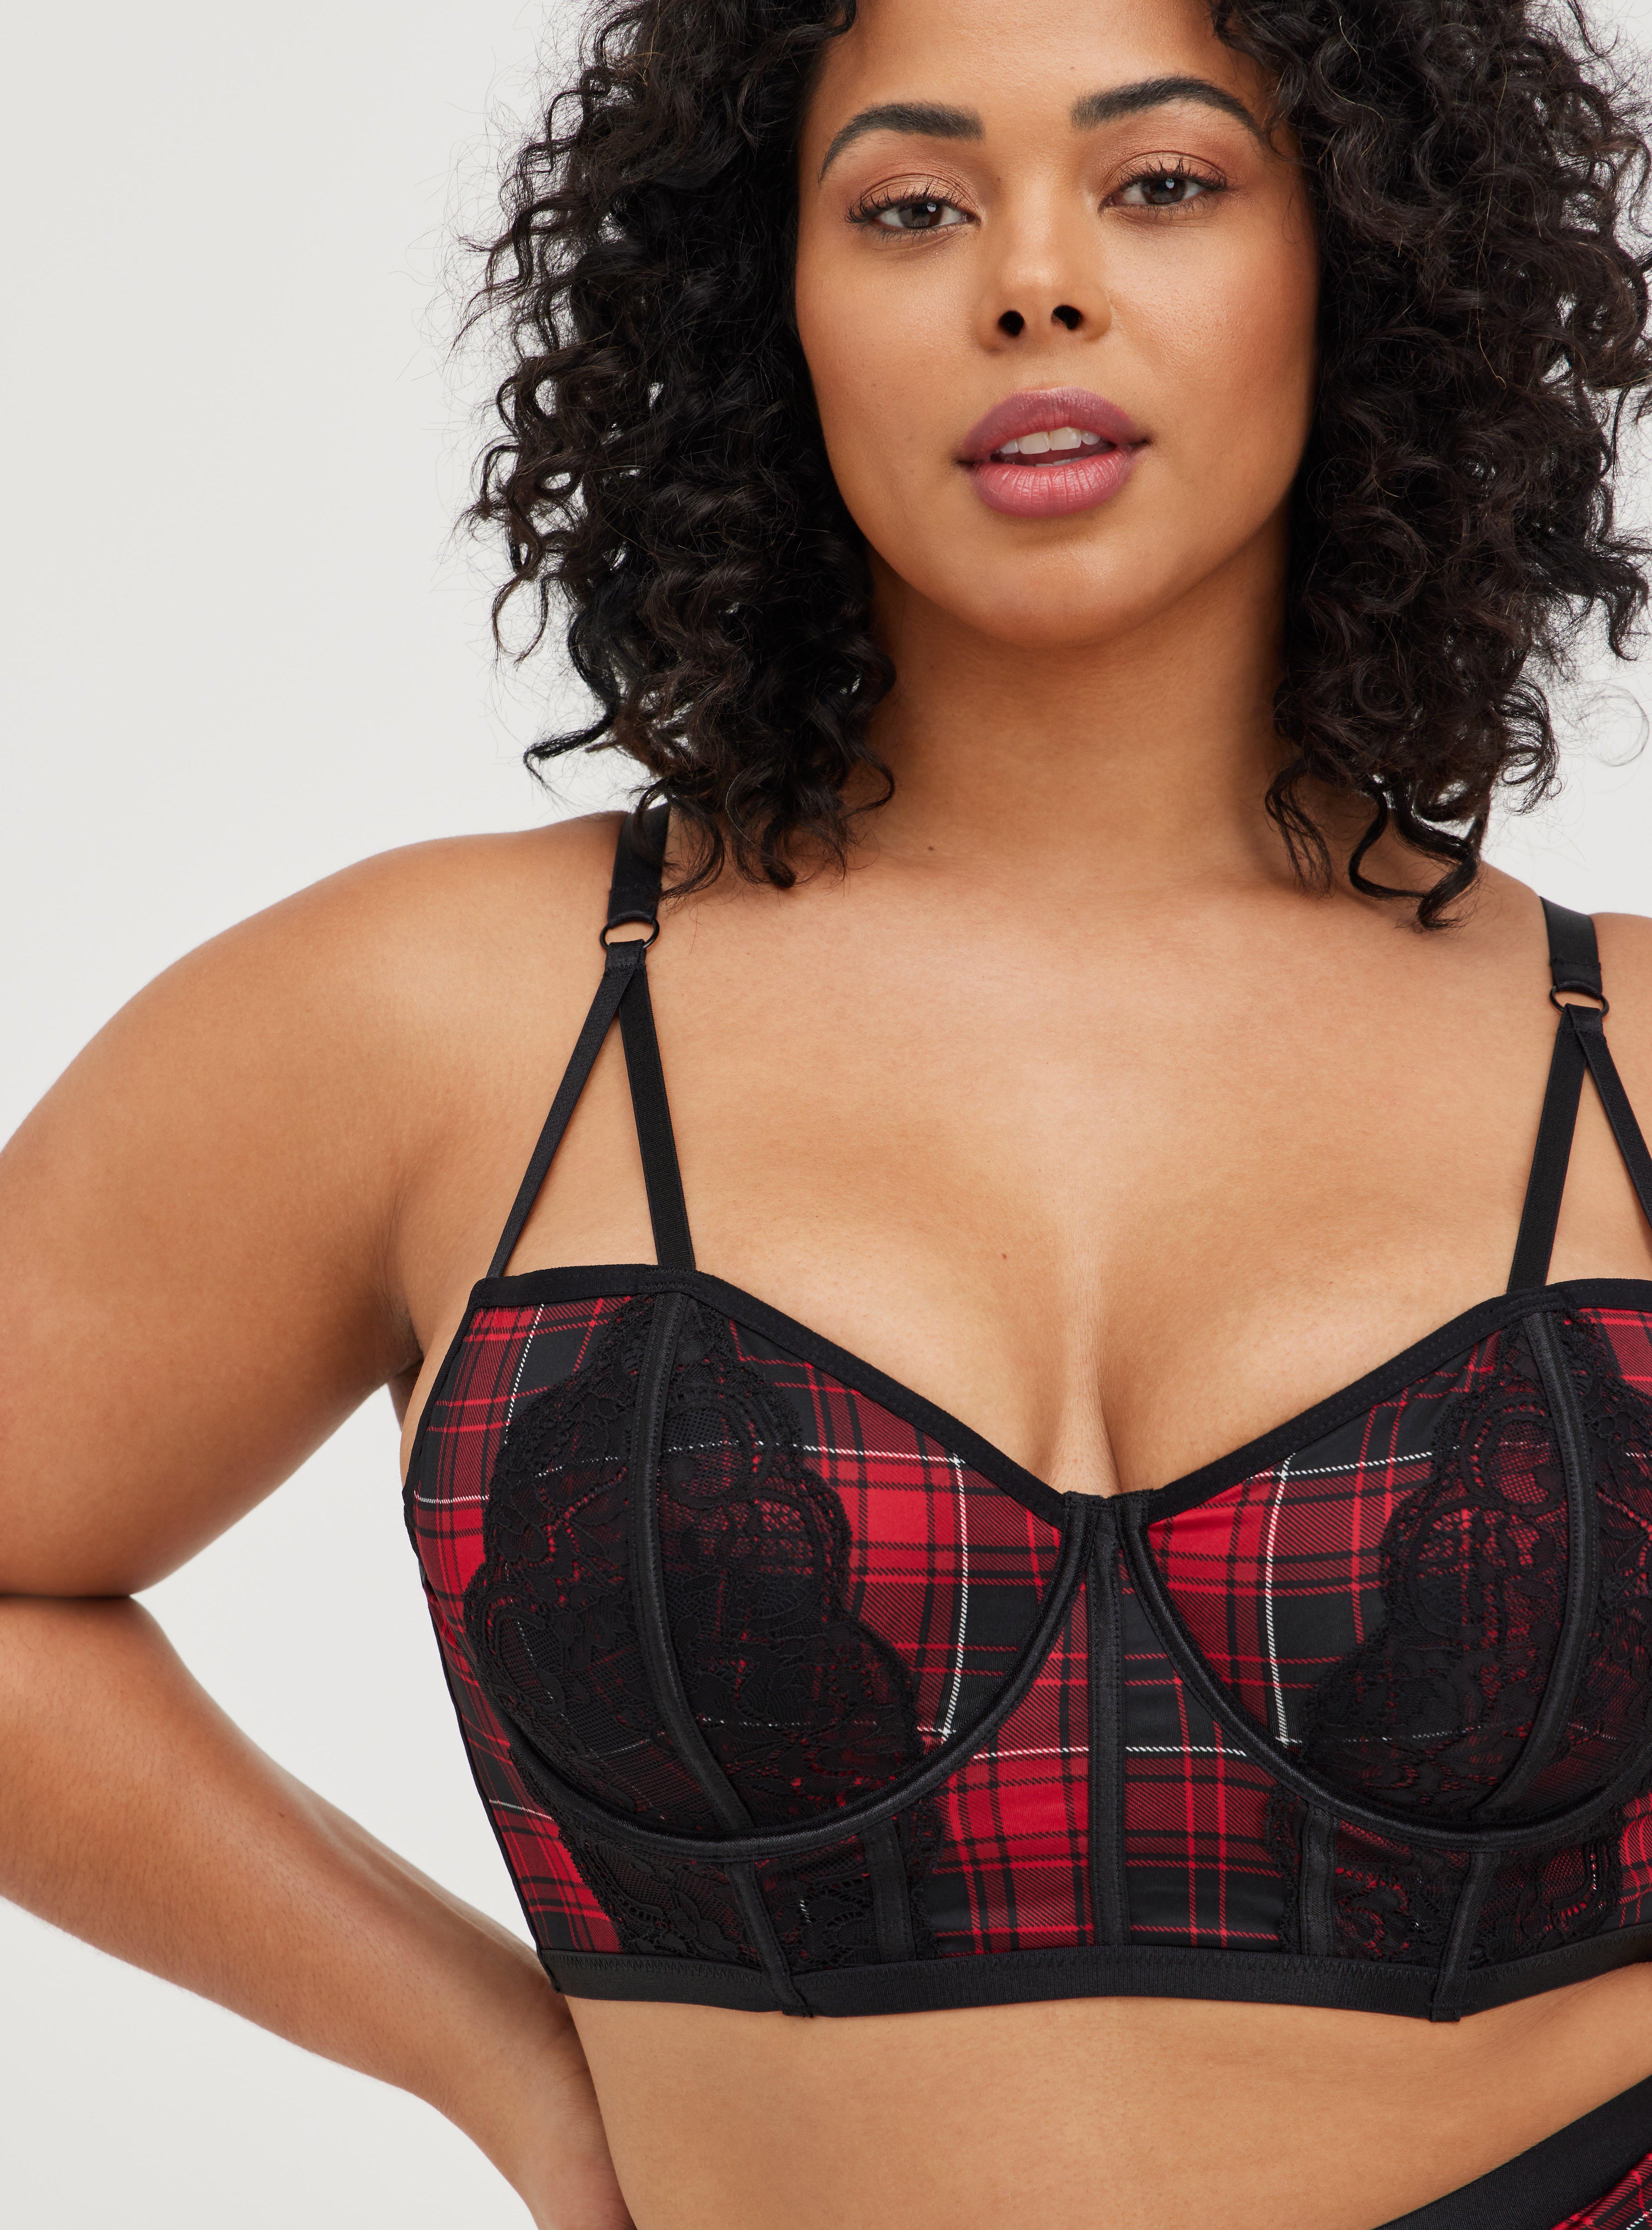 NWT TORRID SIZE 3x UNLINED LONGLINE STRAPPY BRALETTE - PLAID RED